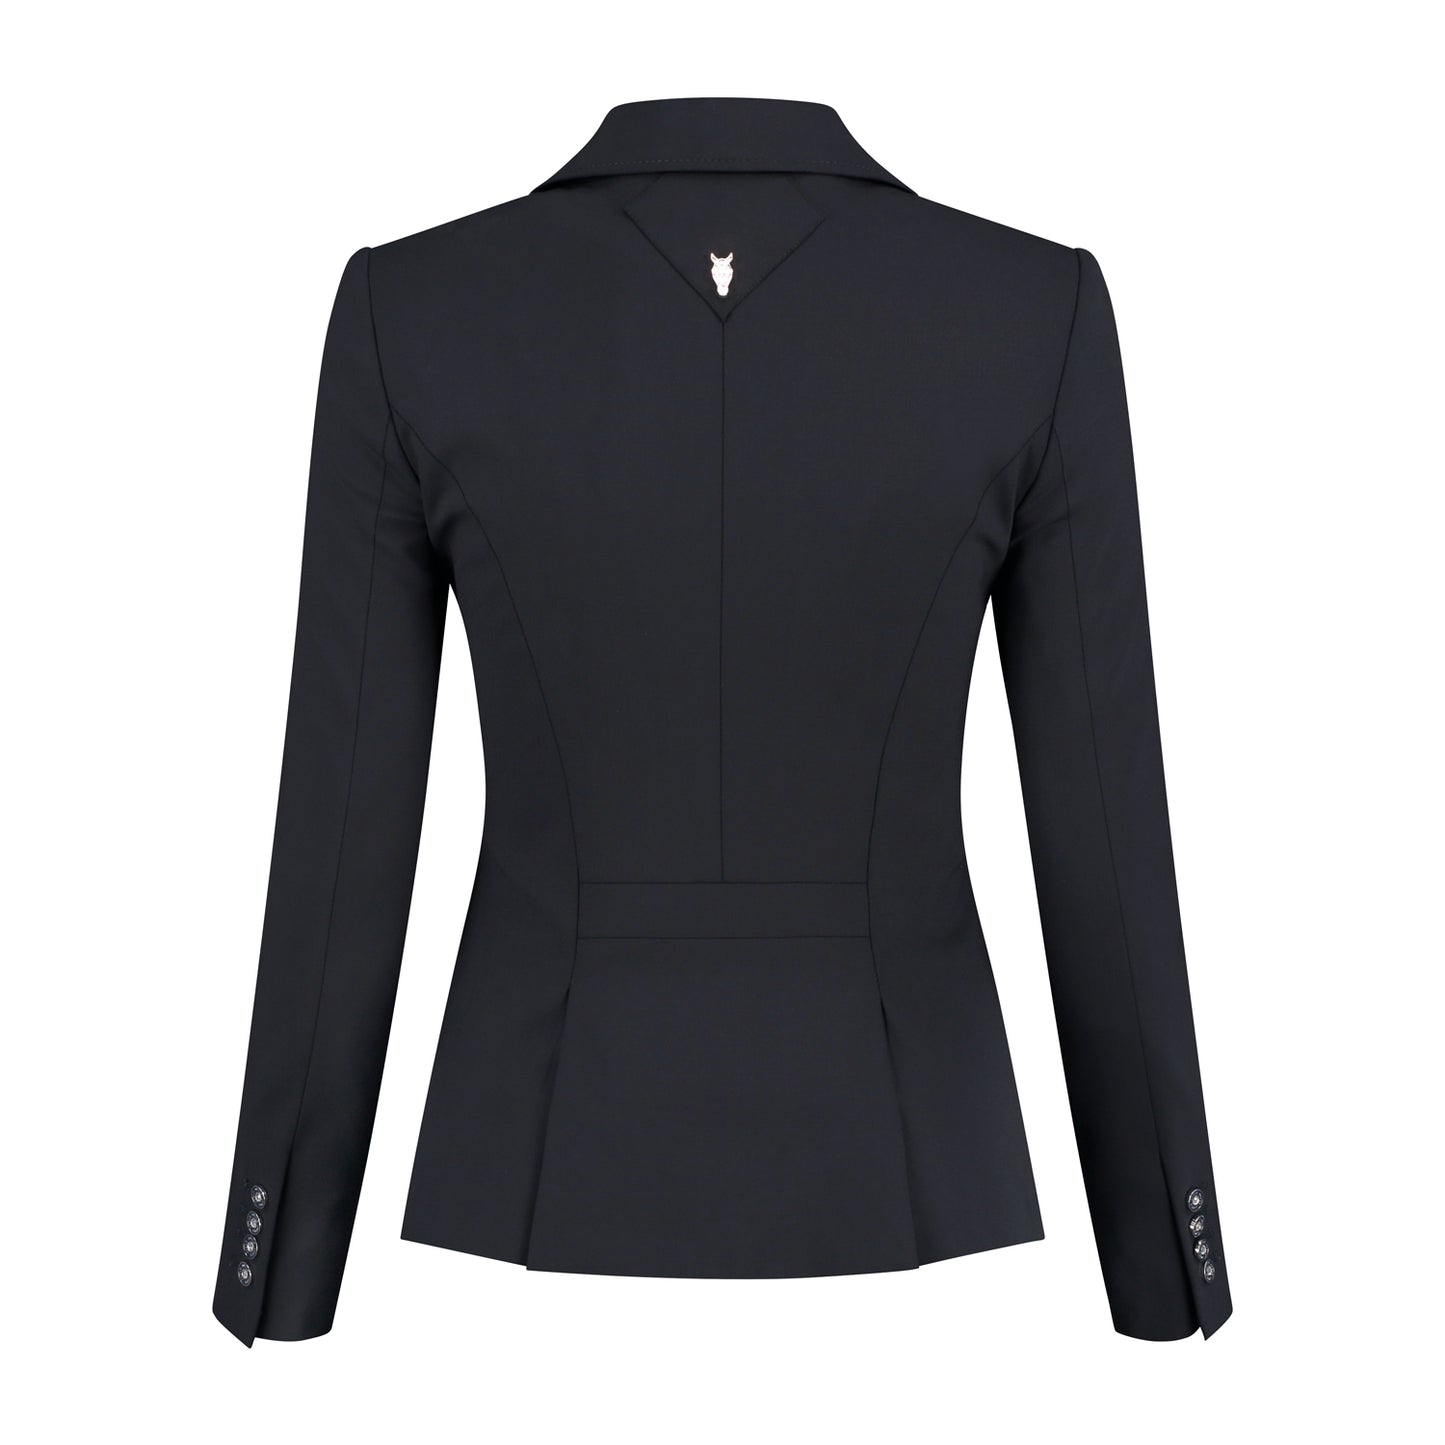 Competition jacket - Classic navy